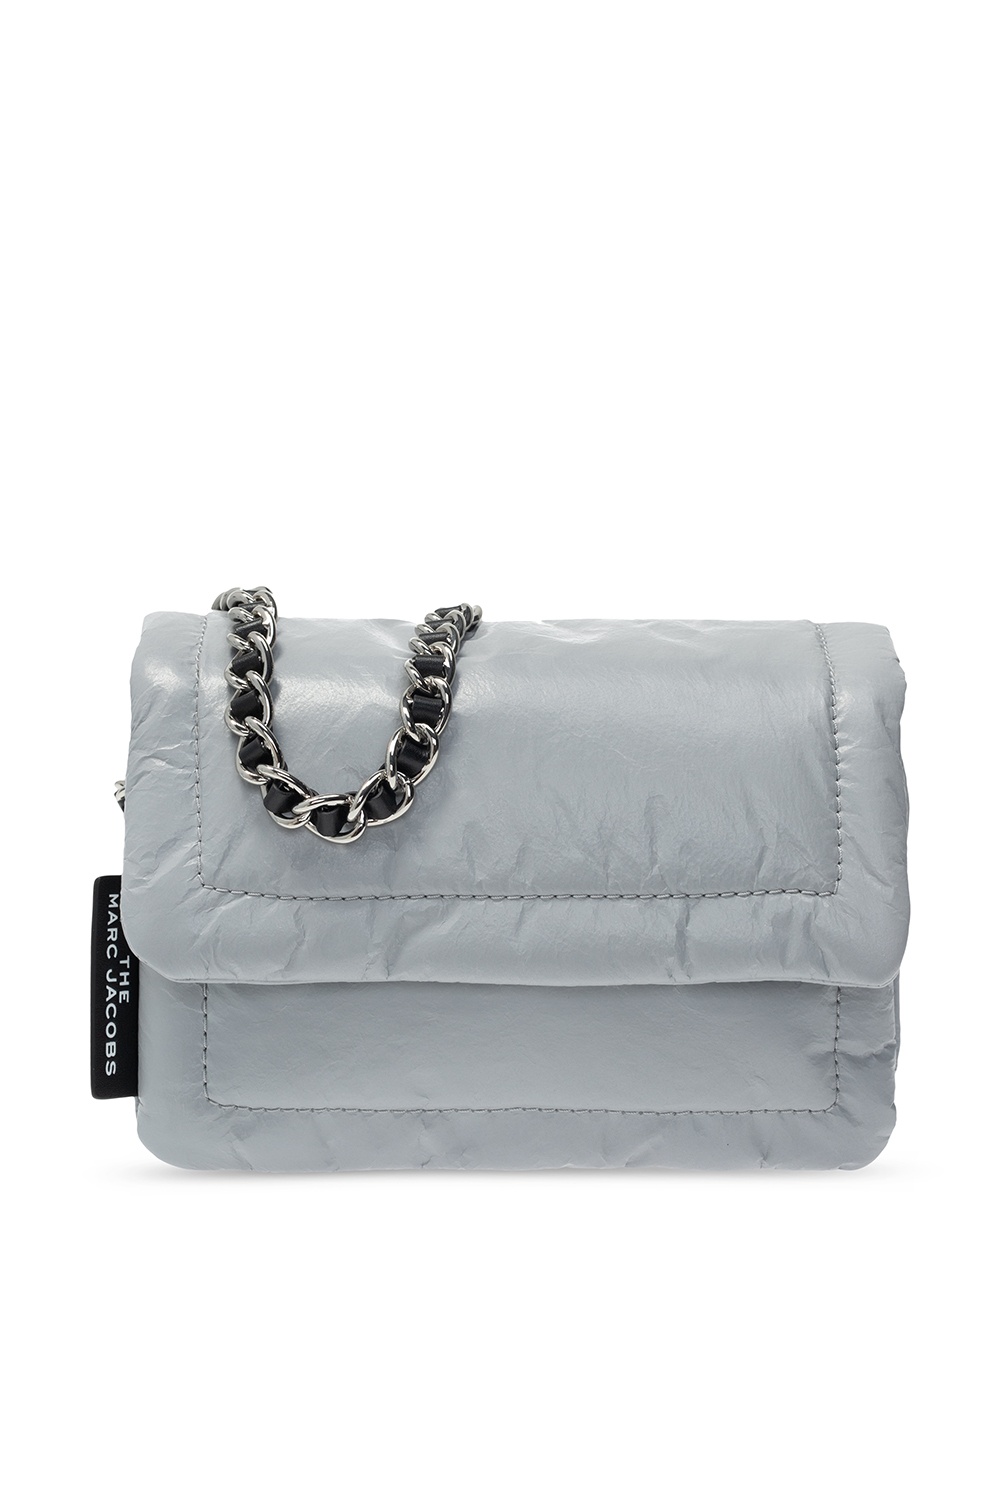 Sell Marc Jacobs The Pillow Bag - Black